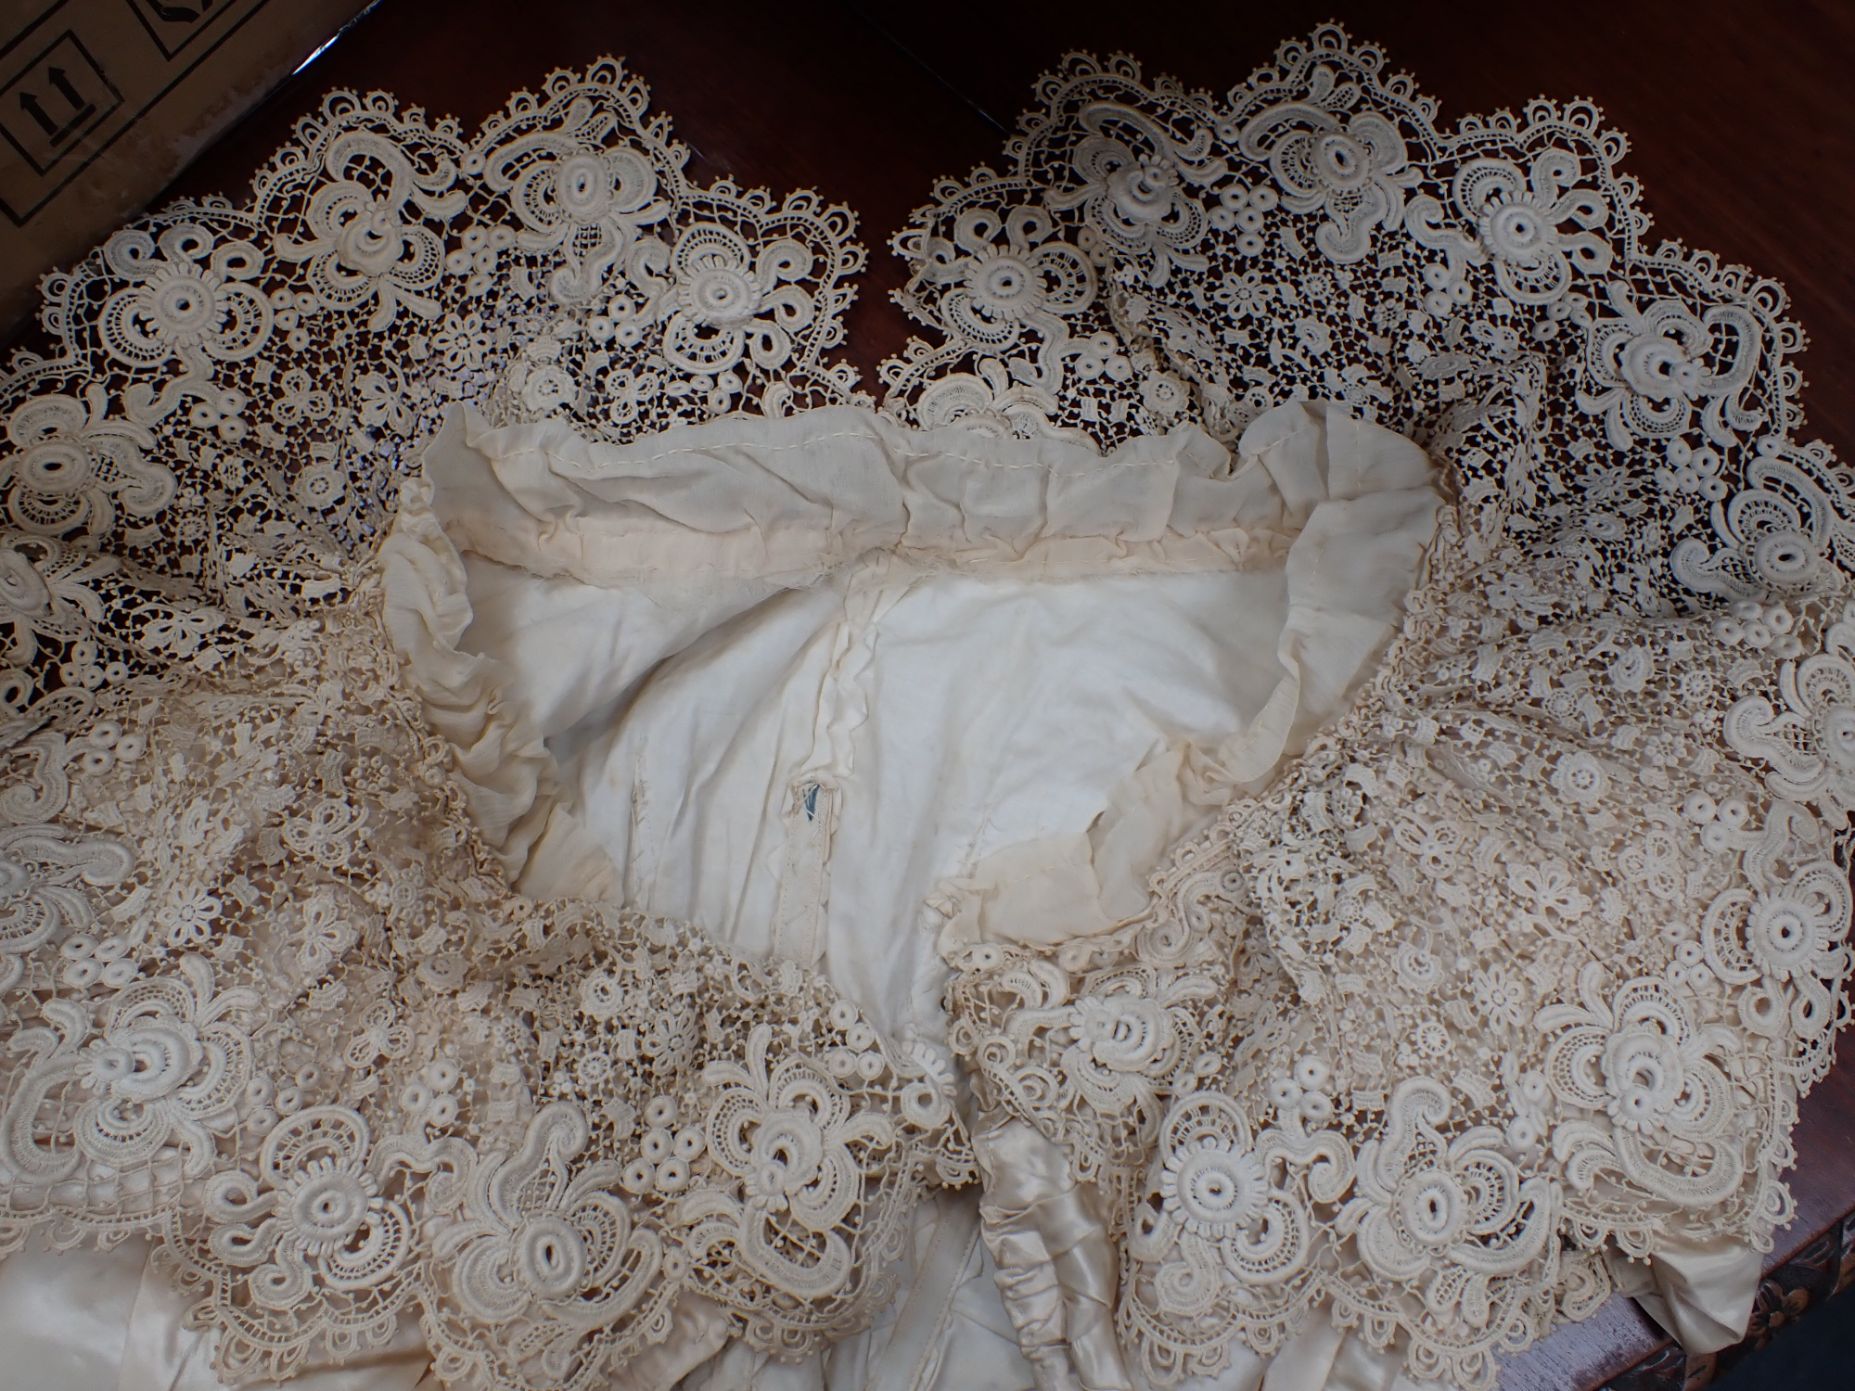 A LATE VICTORIAN SILK WEDDING DRESS, WITH LACE COLLAR AND PANELS - Image 6 of 11